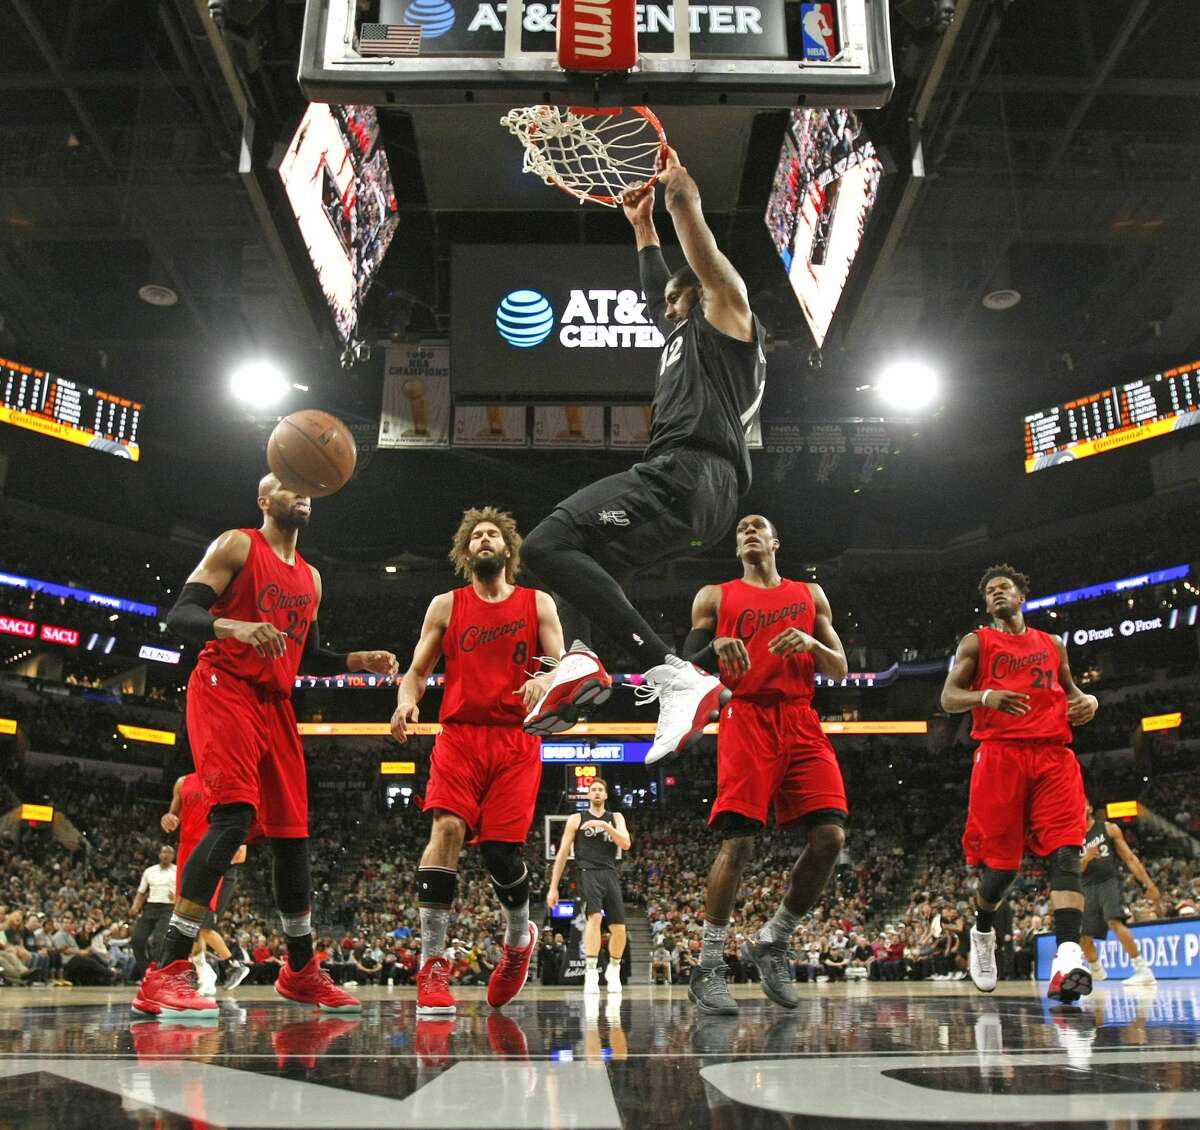 SAN ANTONIO,TX - DECEMBER 25: LaMarcus Aldridge #12 of the San Antonio Spurs dunks in front of Chicago Bulls players at AT&T Center on December 25, 2016 in San Antonio, Texas. NOTE TO USER: User expressly acknowledges and agrees that , by downloading and or using this photograph, User is consenting to the terms and conditions of the Getty Images License Agreement. (Photo by Ronald Cortes/Getty Images)